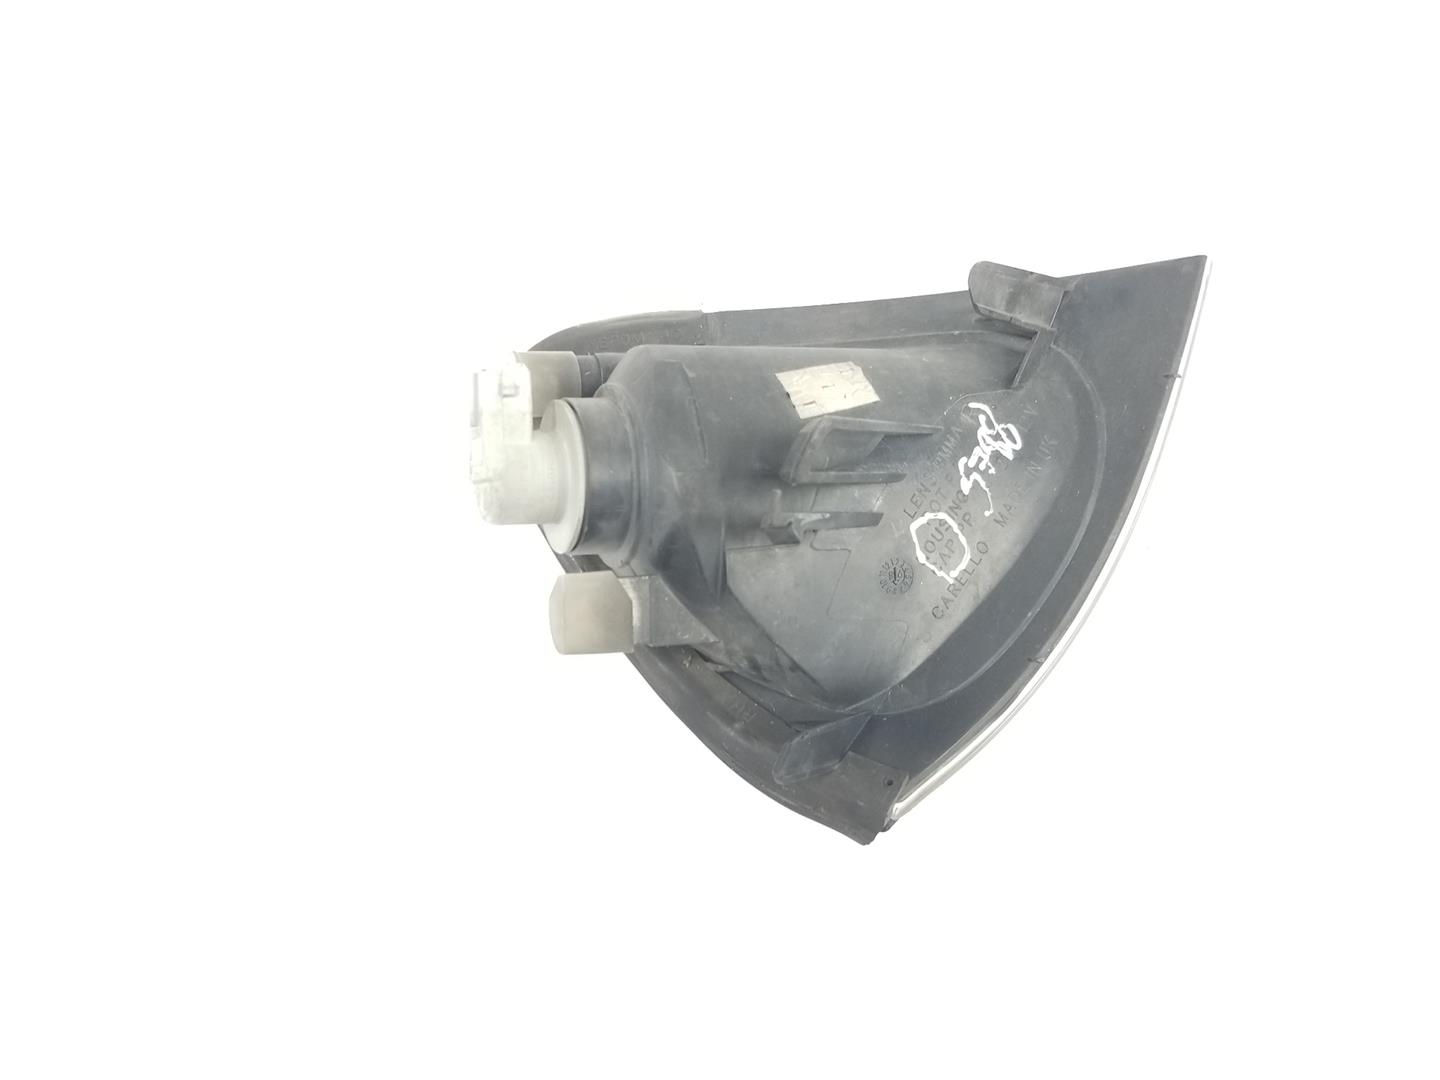 TOYOTA Avensis 2 generation (2002-2009) Front Right Fender Turn Signal 8151005020, 8151105020 19930182